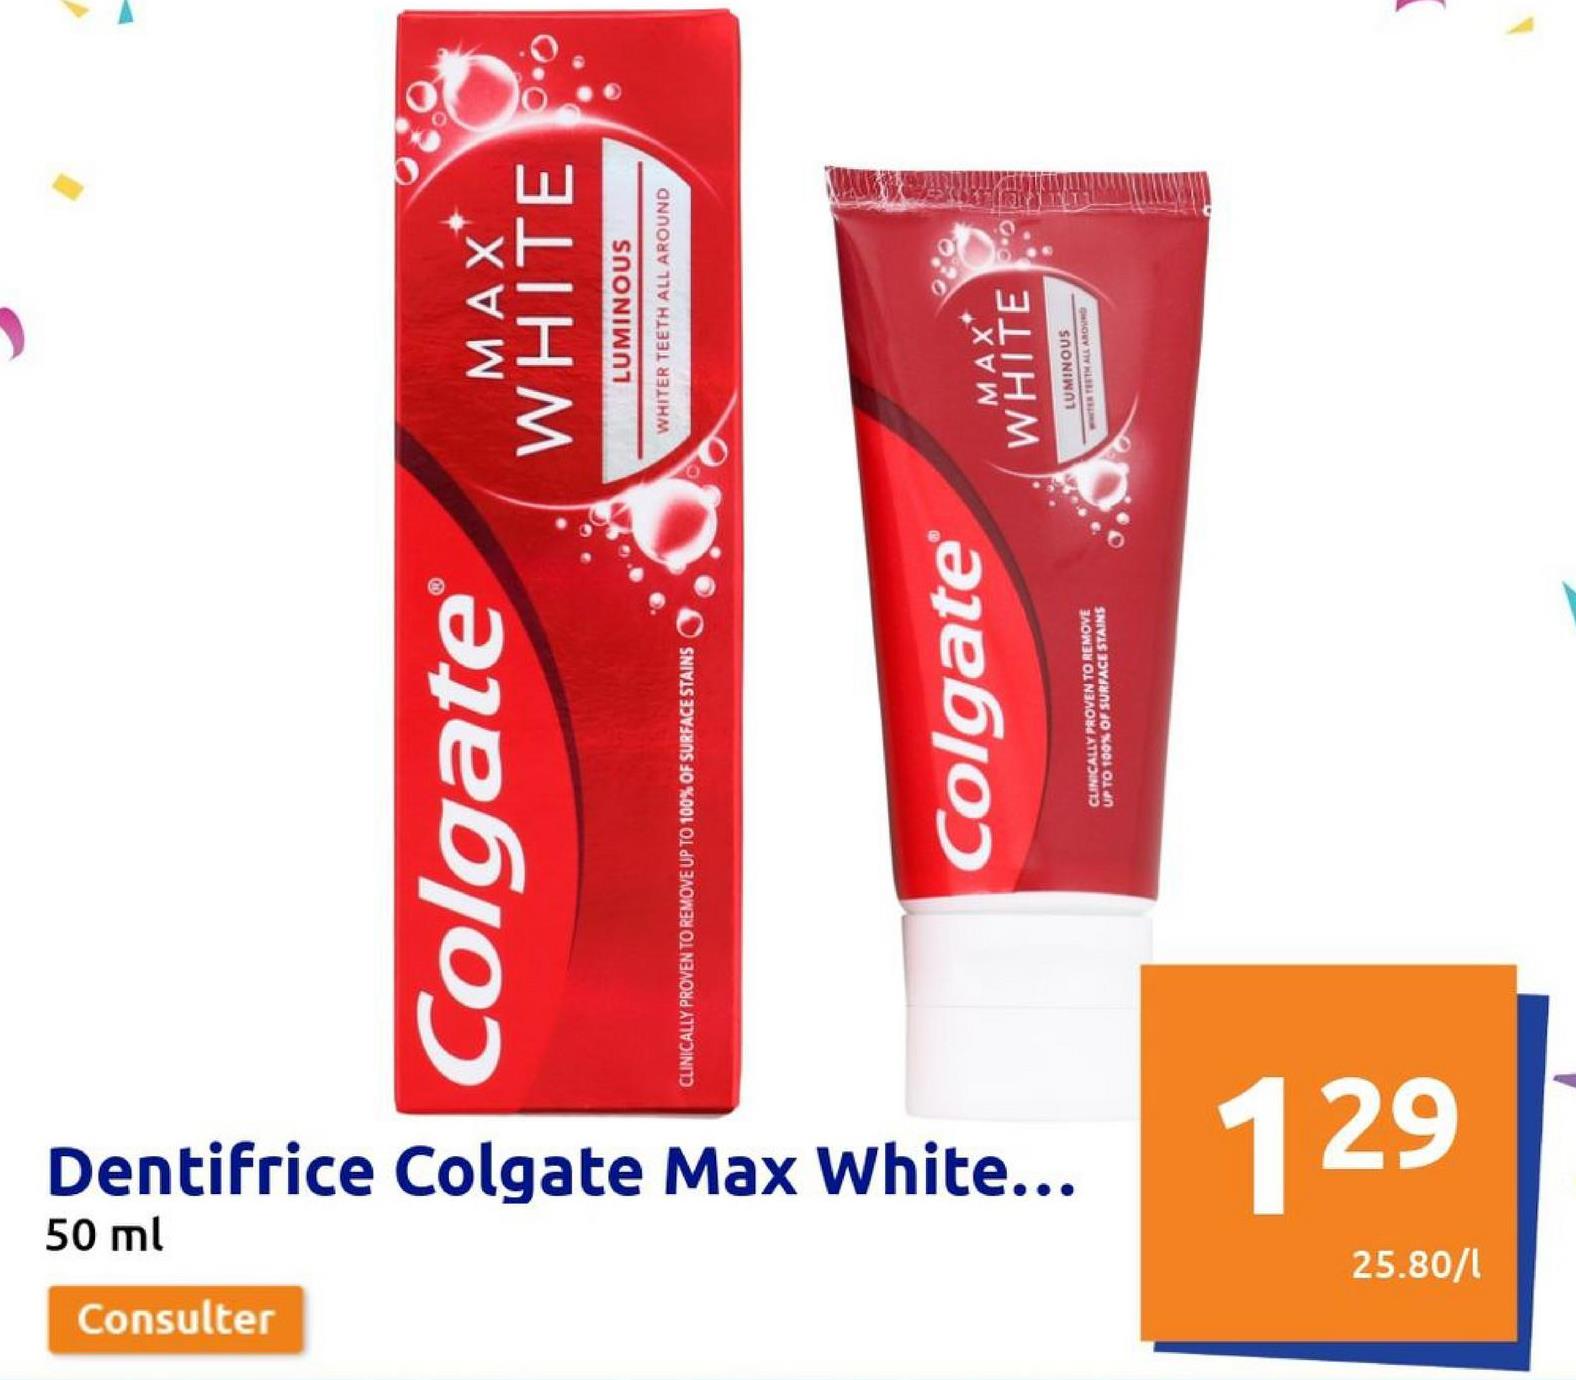 Consulter
50 ml
Dentifrice Colgate Max White...
Colgate®
CLINICALLY PROVEN TO REMOVE UP TO 100% OF SURFACE STAINS
25.80/1
129
Colgate®
CLINICALLY PROVEN TO REMOVE
UP TO 100% OF SURFACE STAINS
MAX*
WHITE PO
LUMINOUS
WHITER TEETH ALL AROUND
MAX
WHITE
LUMINOUS
TER TEETH ALL AROUND
)